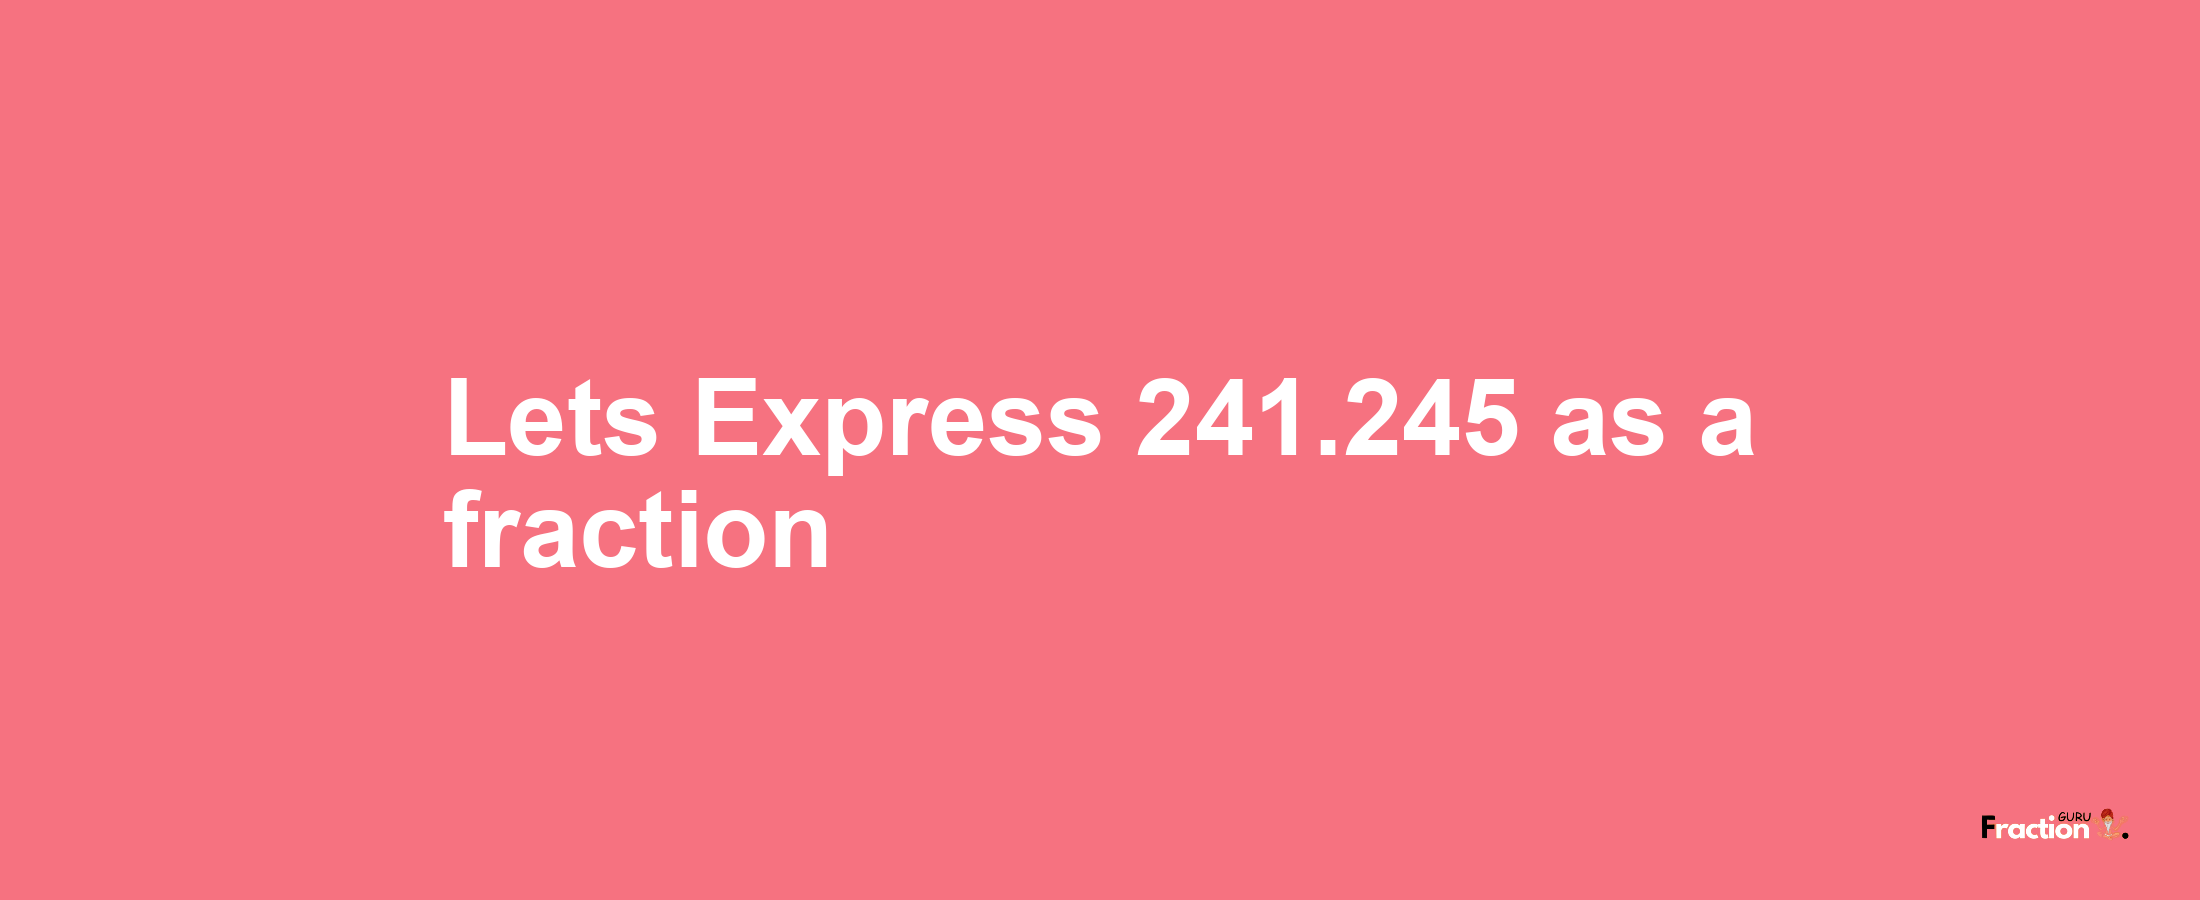 Lets Express 241.245 as afraction